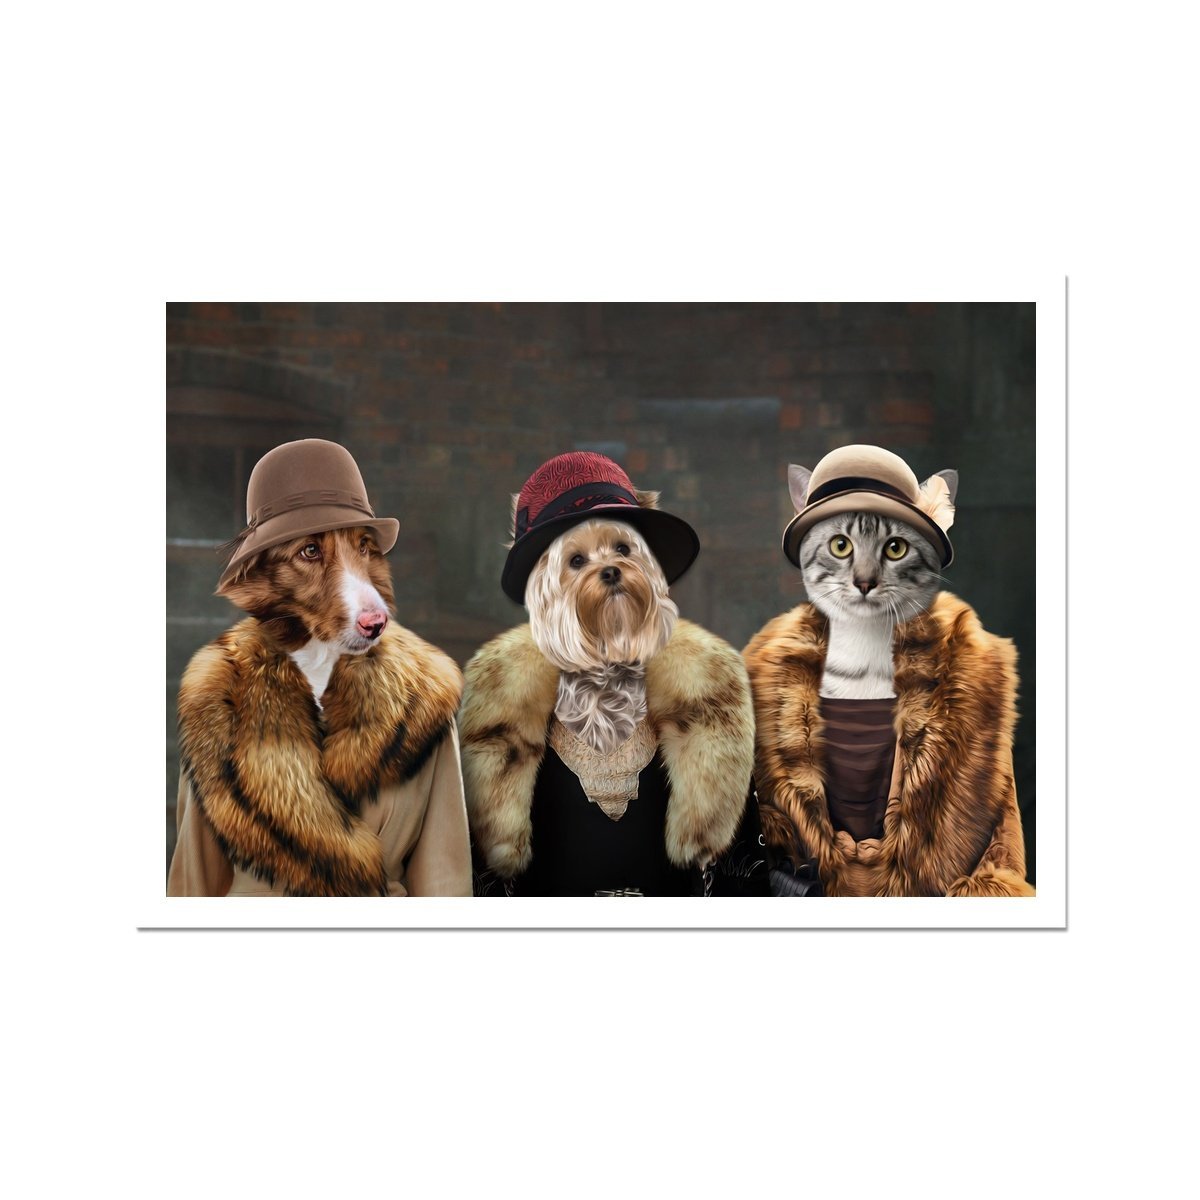 The Women (Peaky Blinders Inspired) 3 Pet: Custom Pet Poster - Paw & Glory - #pet portraits# - #dog portraits# - #pet portraits uk#Paw & Glory, pawandglory, best dog paintings, the admiral dog portrait, pictures for pets, original pet portraits, painting of your dog, admiral pet portrait, pet portrait